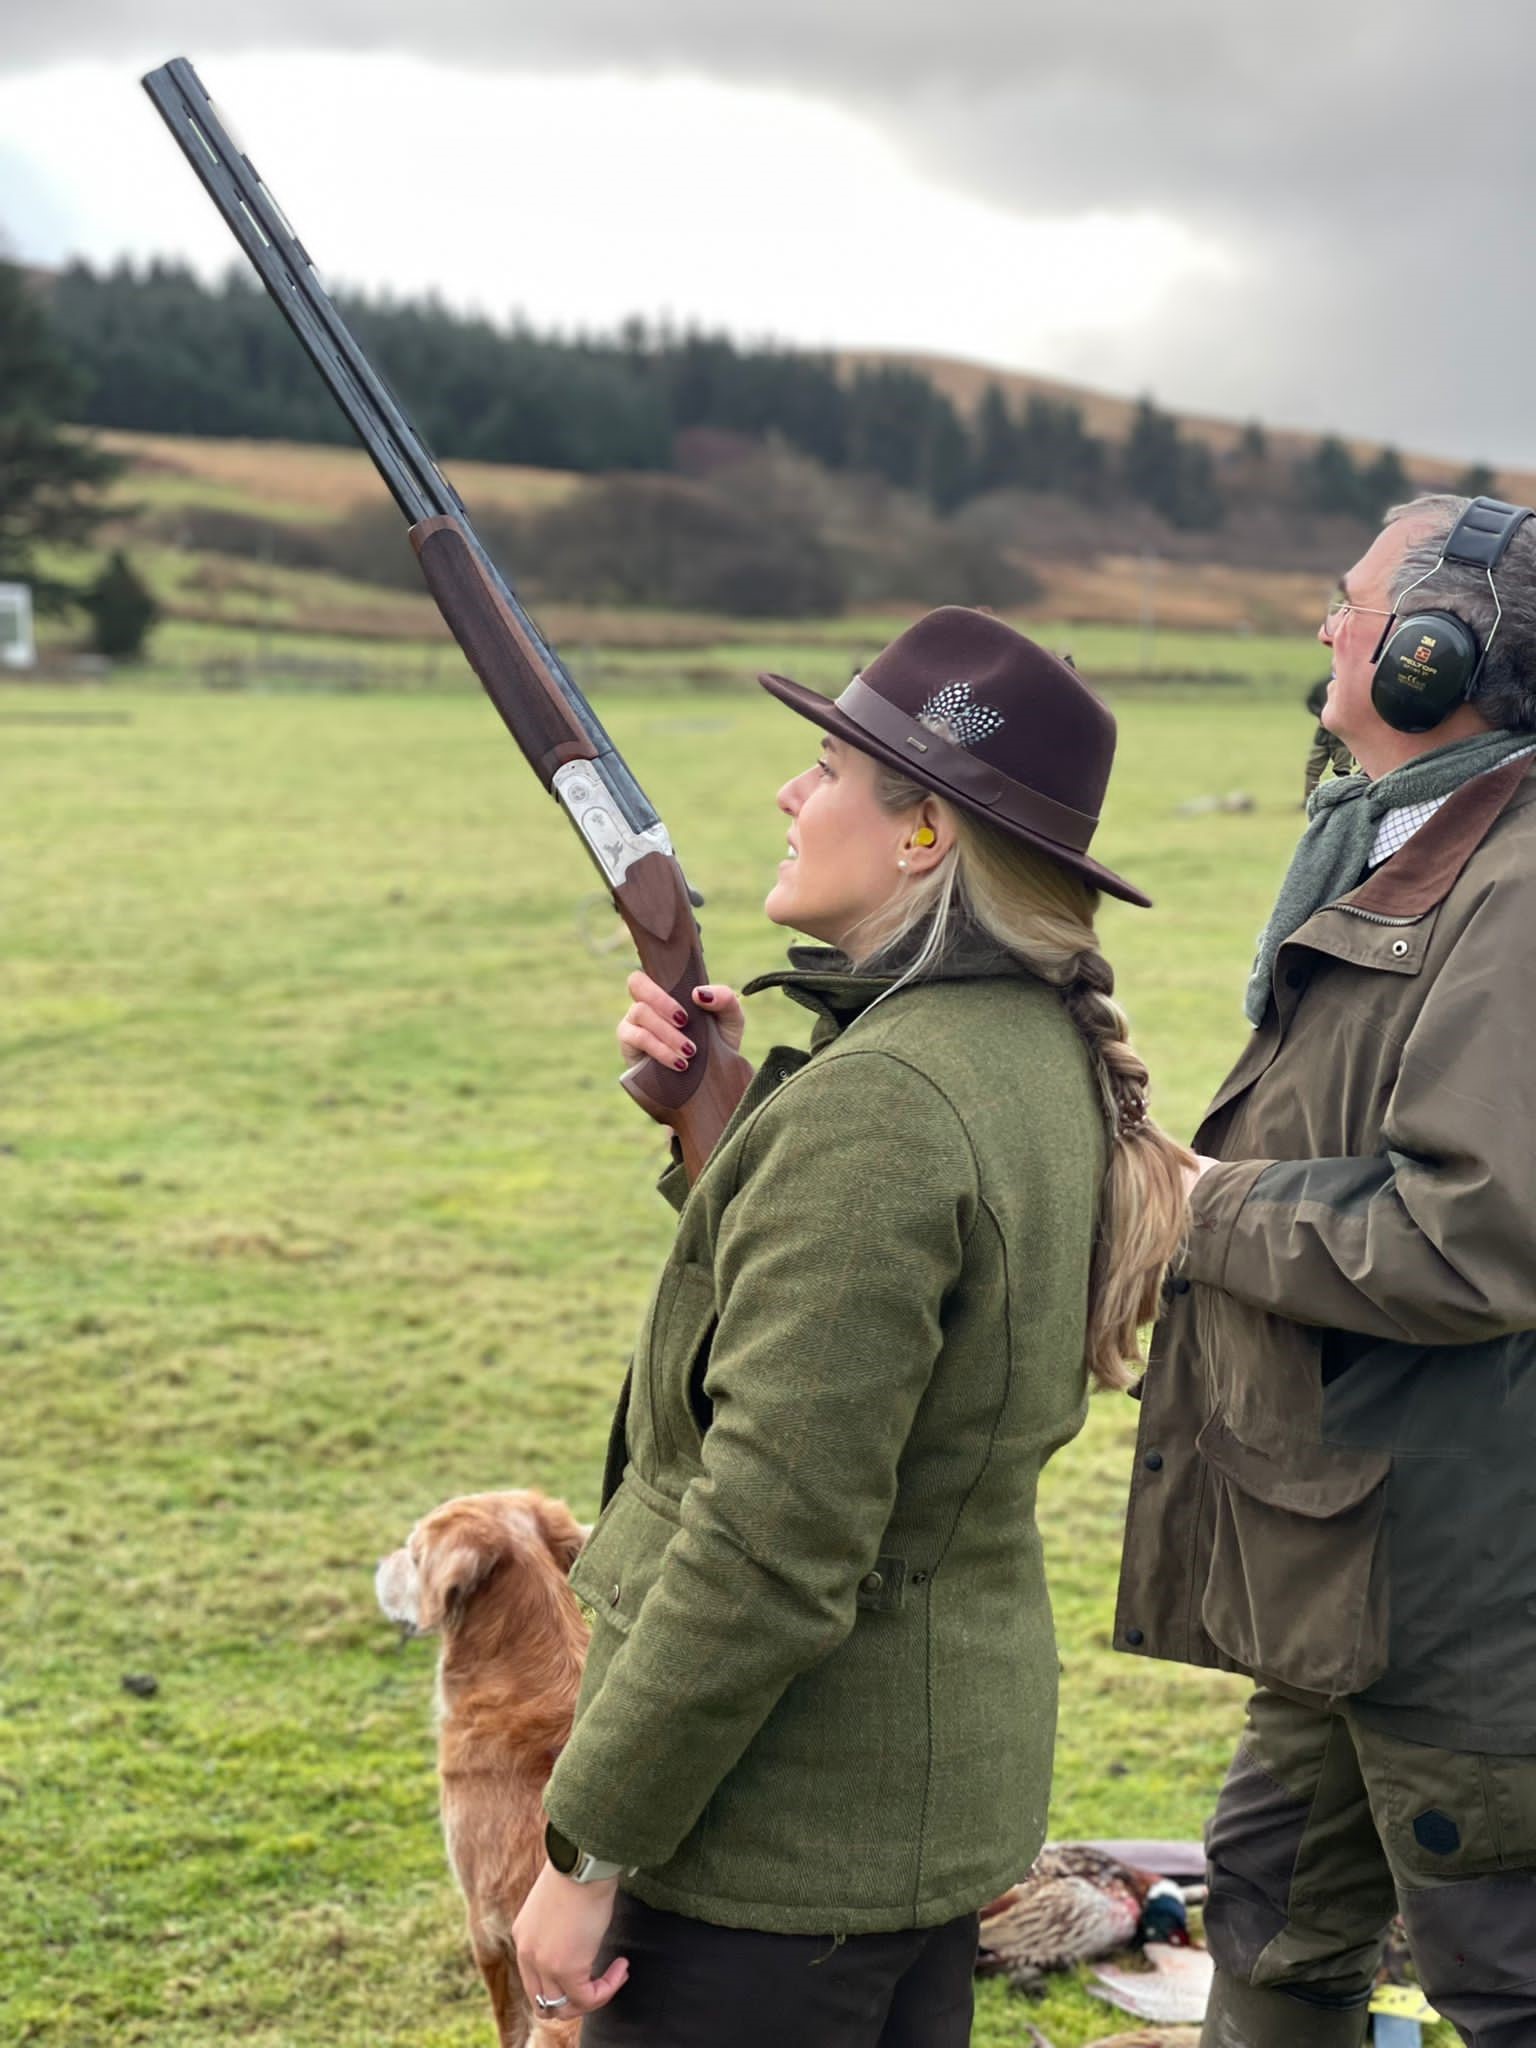 Shooting on the Dougarie Estate in the Scottish Highlands